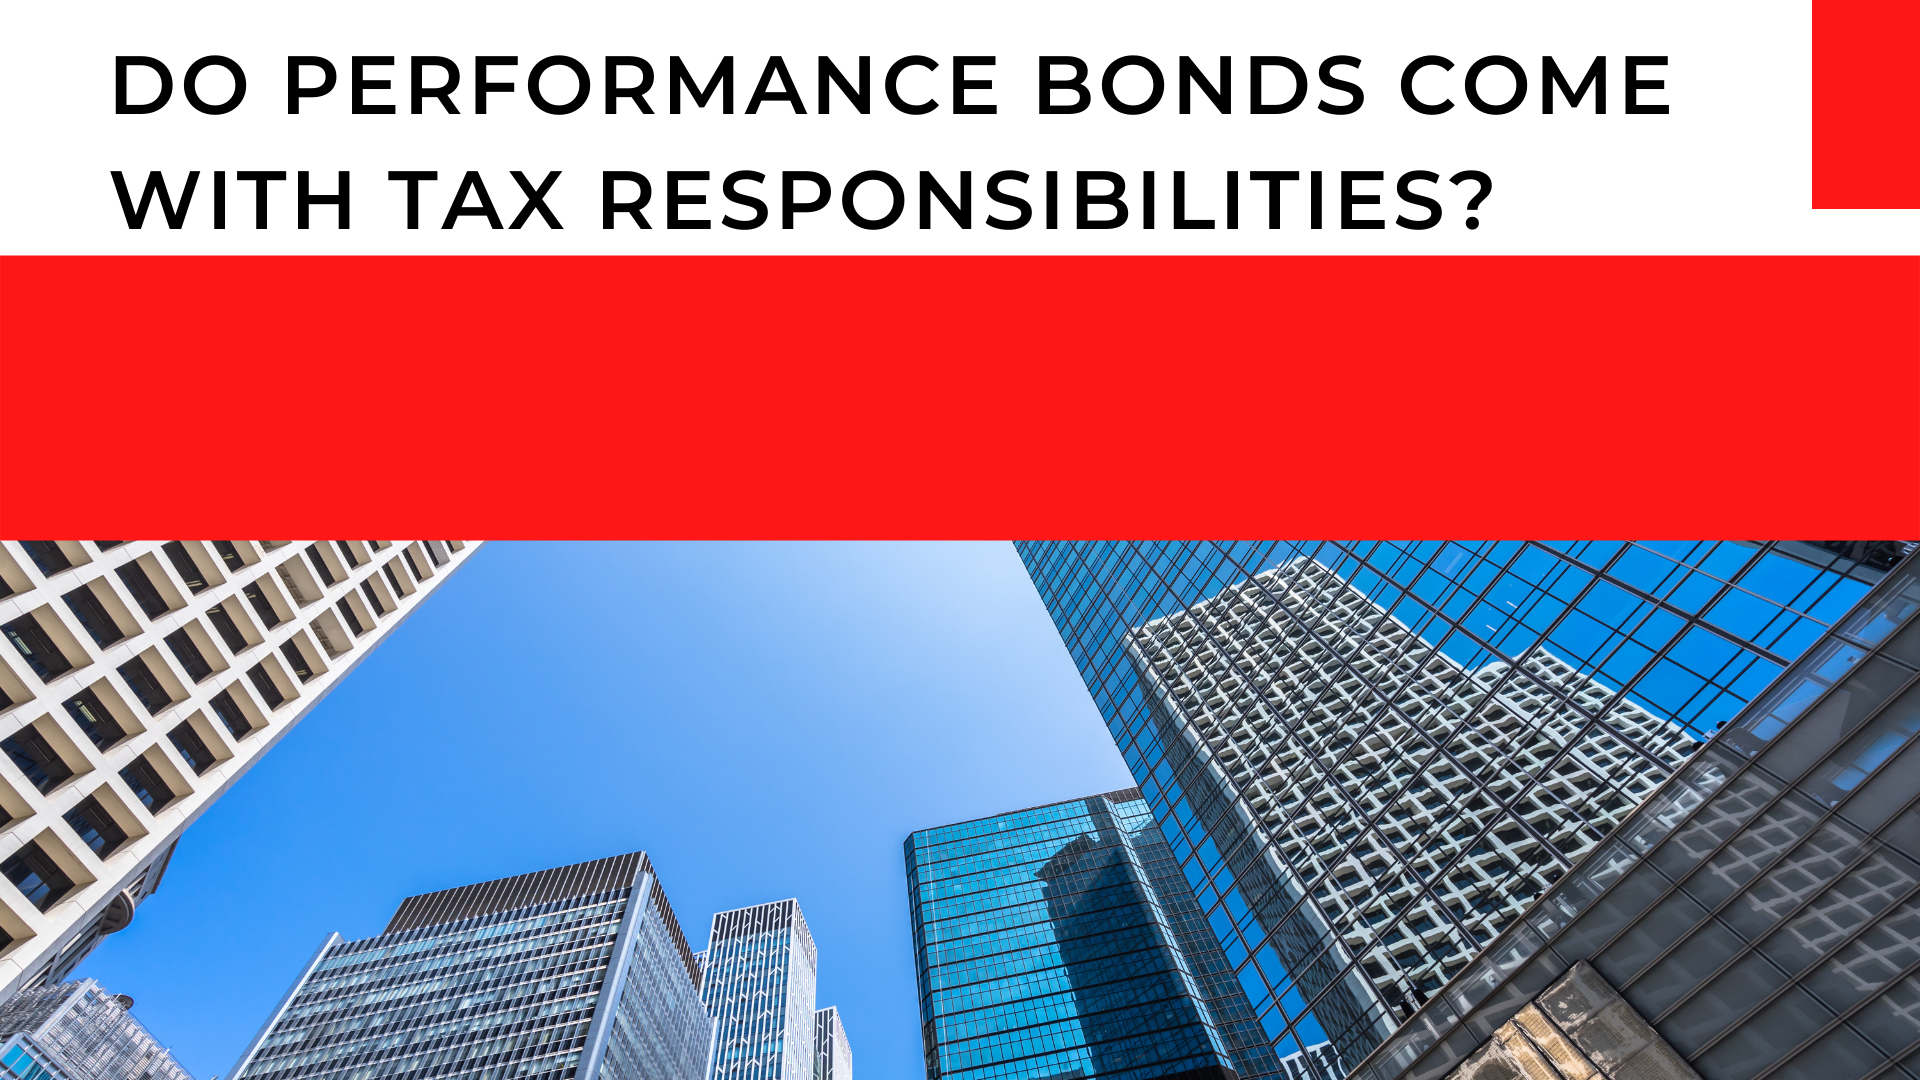 performance bond - Is it possible for performance bonds to be taxed - building